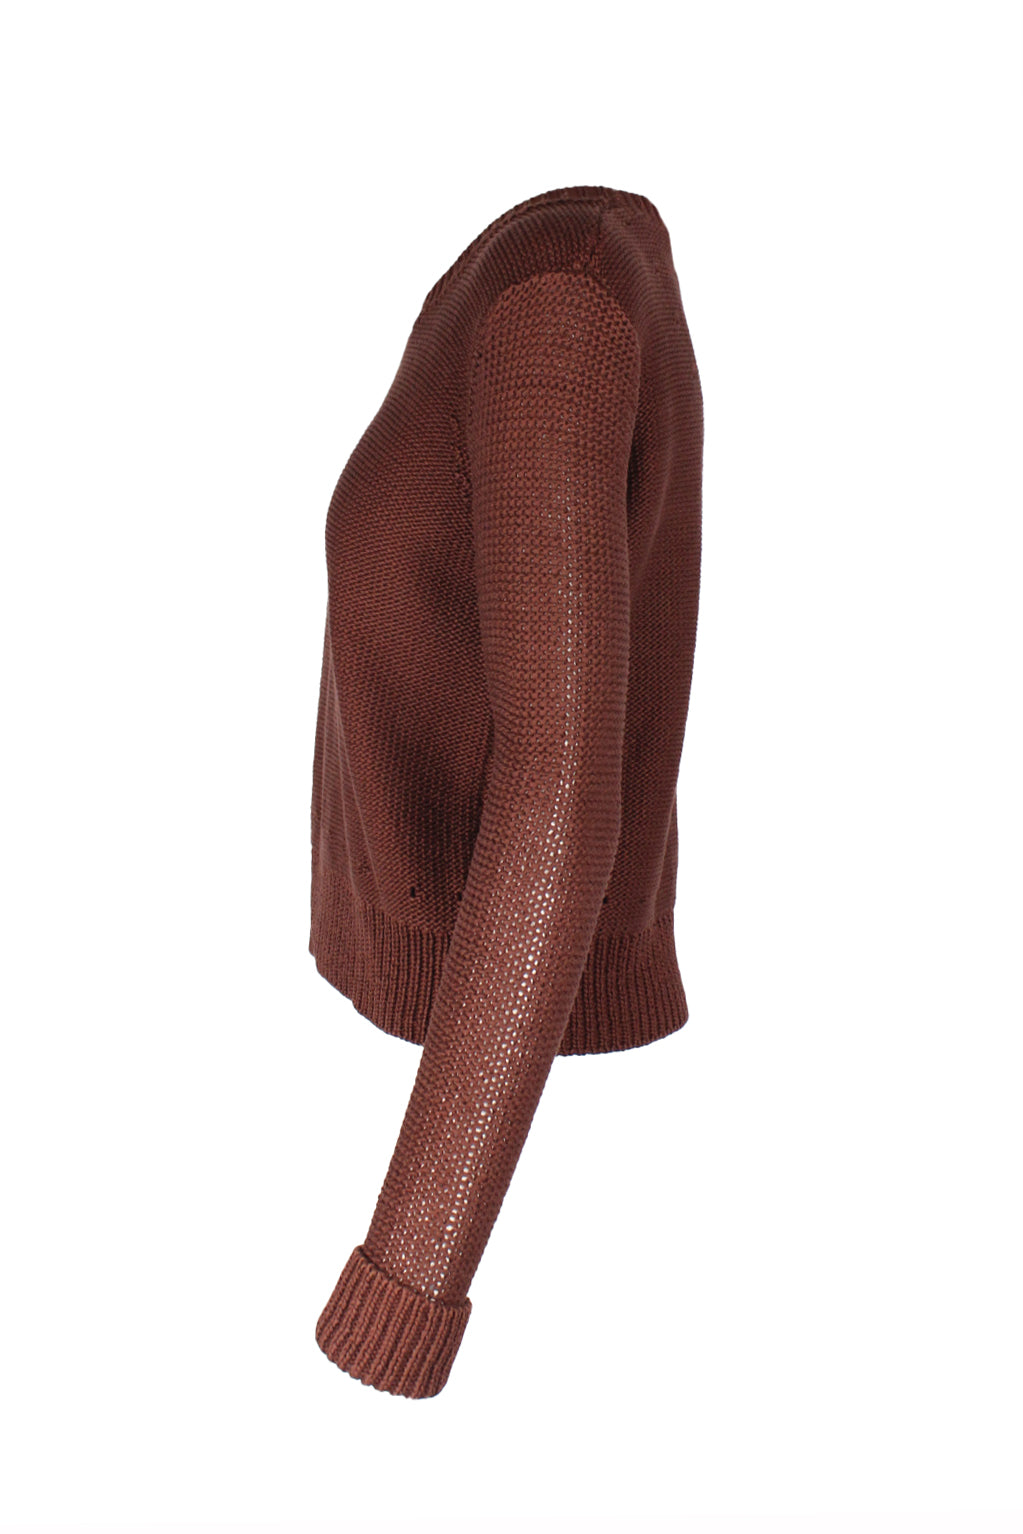 side view of alexander wang brown long sleeve sweater. features crew neckline, ribbed trim, and pull on style; relaxed fit.  detail row of holes near ribbed hem near hip. 